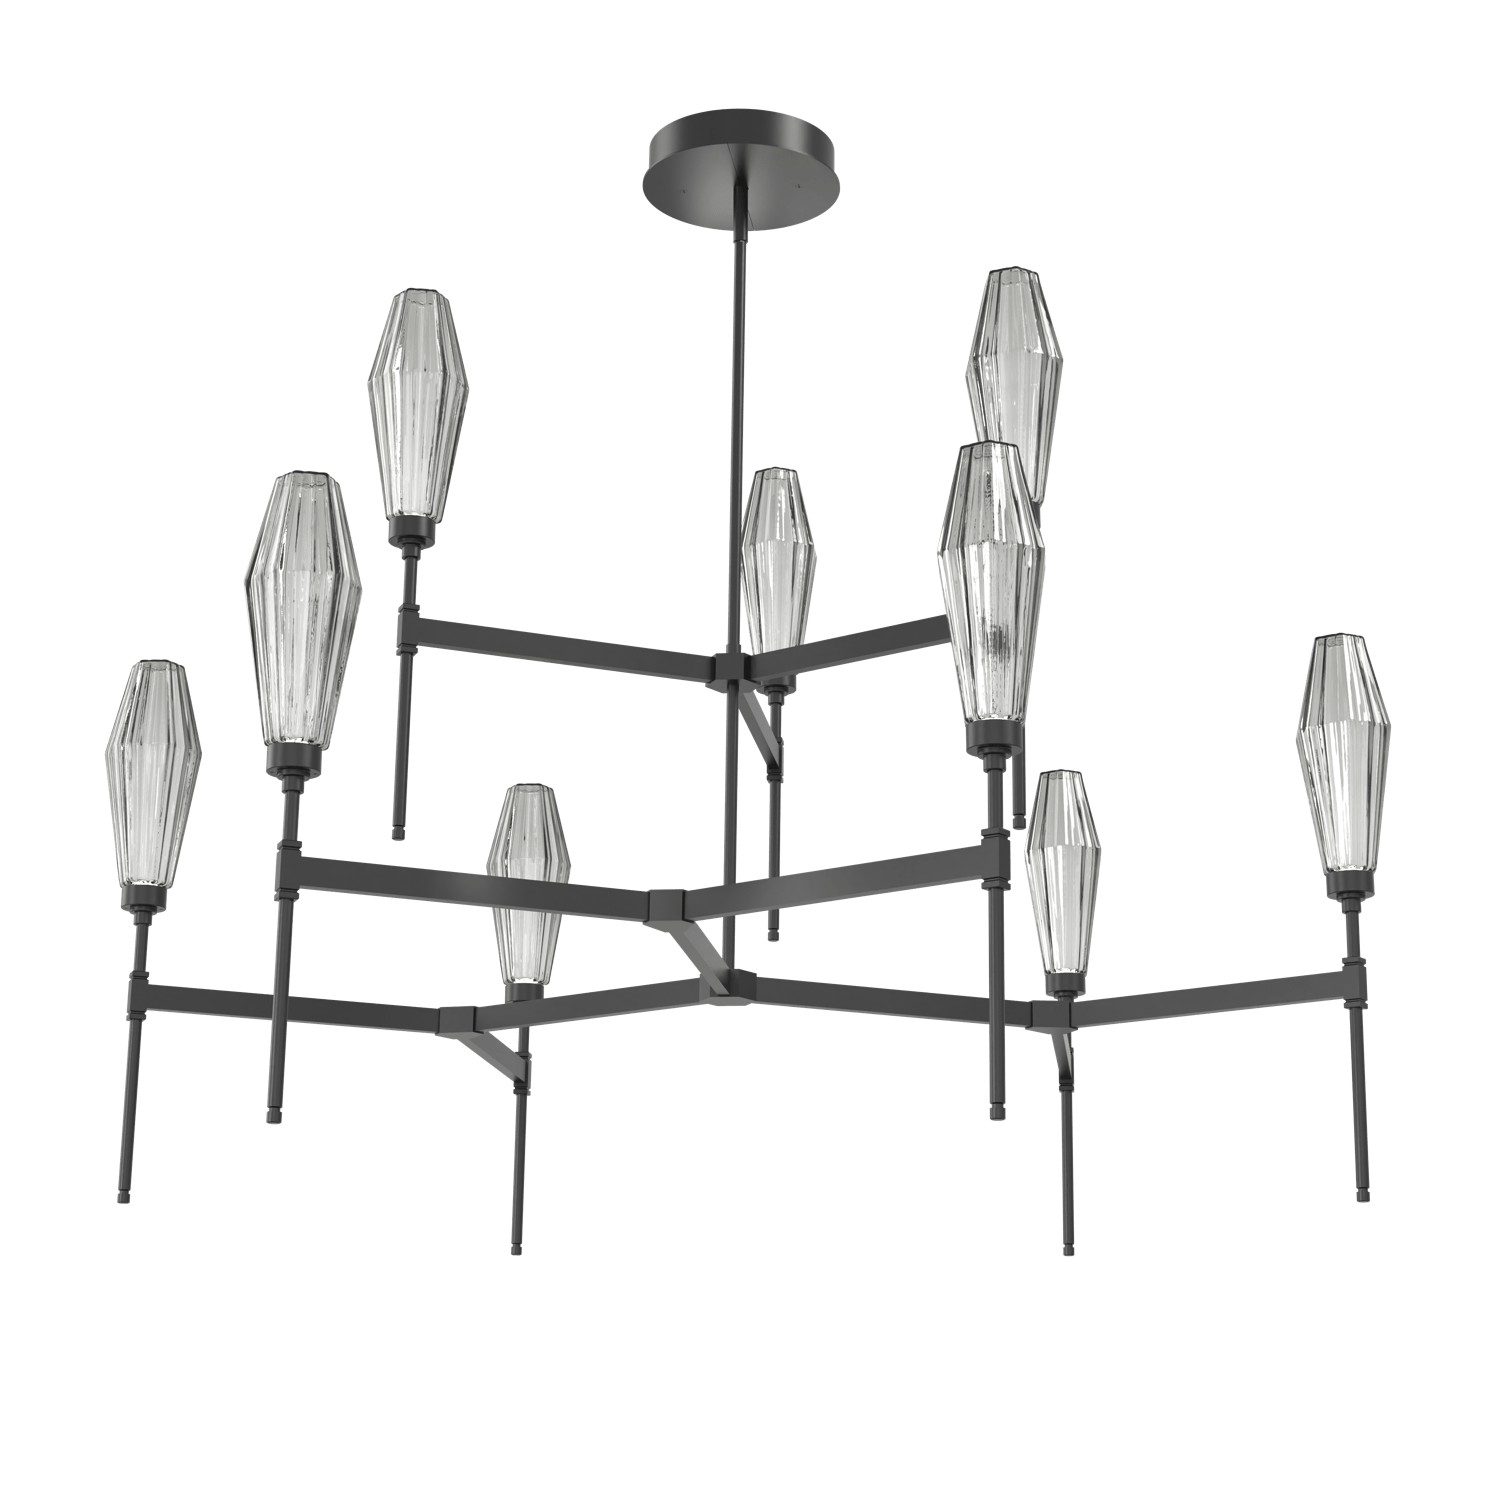 CHB0049-54-MB-RS-Hammerton-Studio-Aalto-54-inch-round-two-tier-belvedere-chandelier-with-matte-black-finish-and-optic-ribbed-smoke-glass-shades-and-LED-lamping